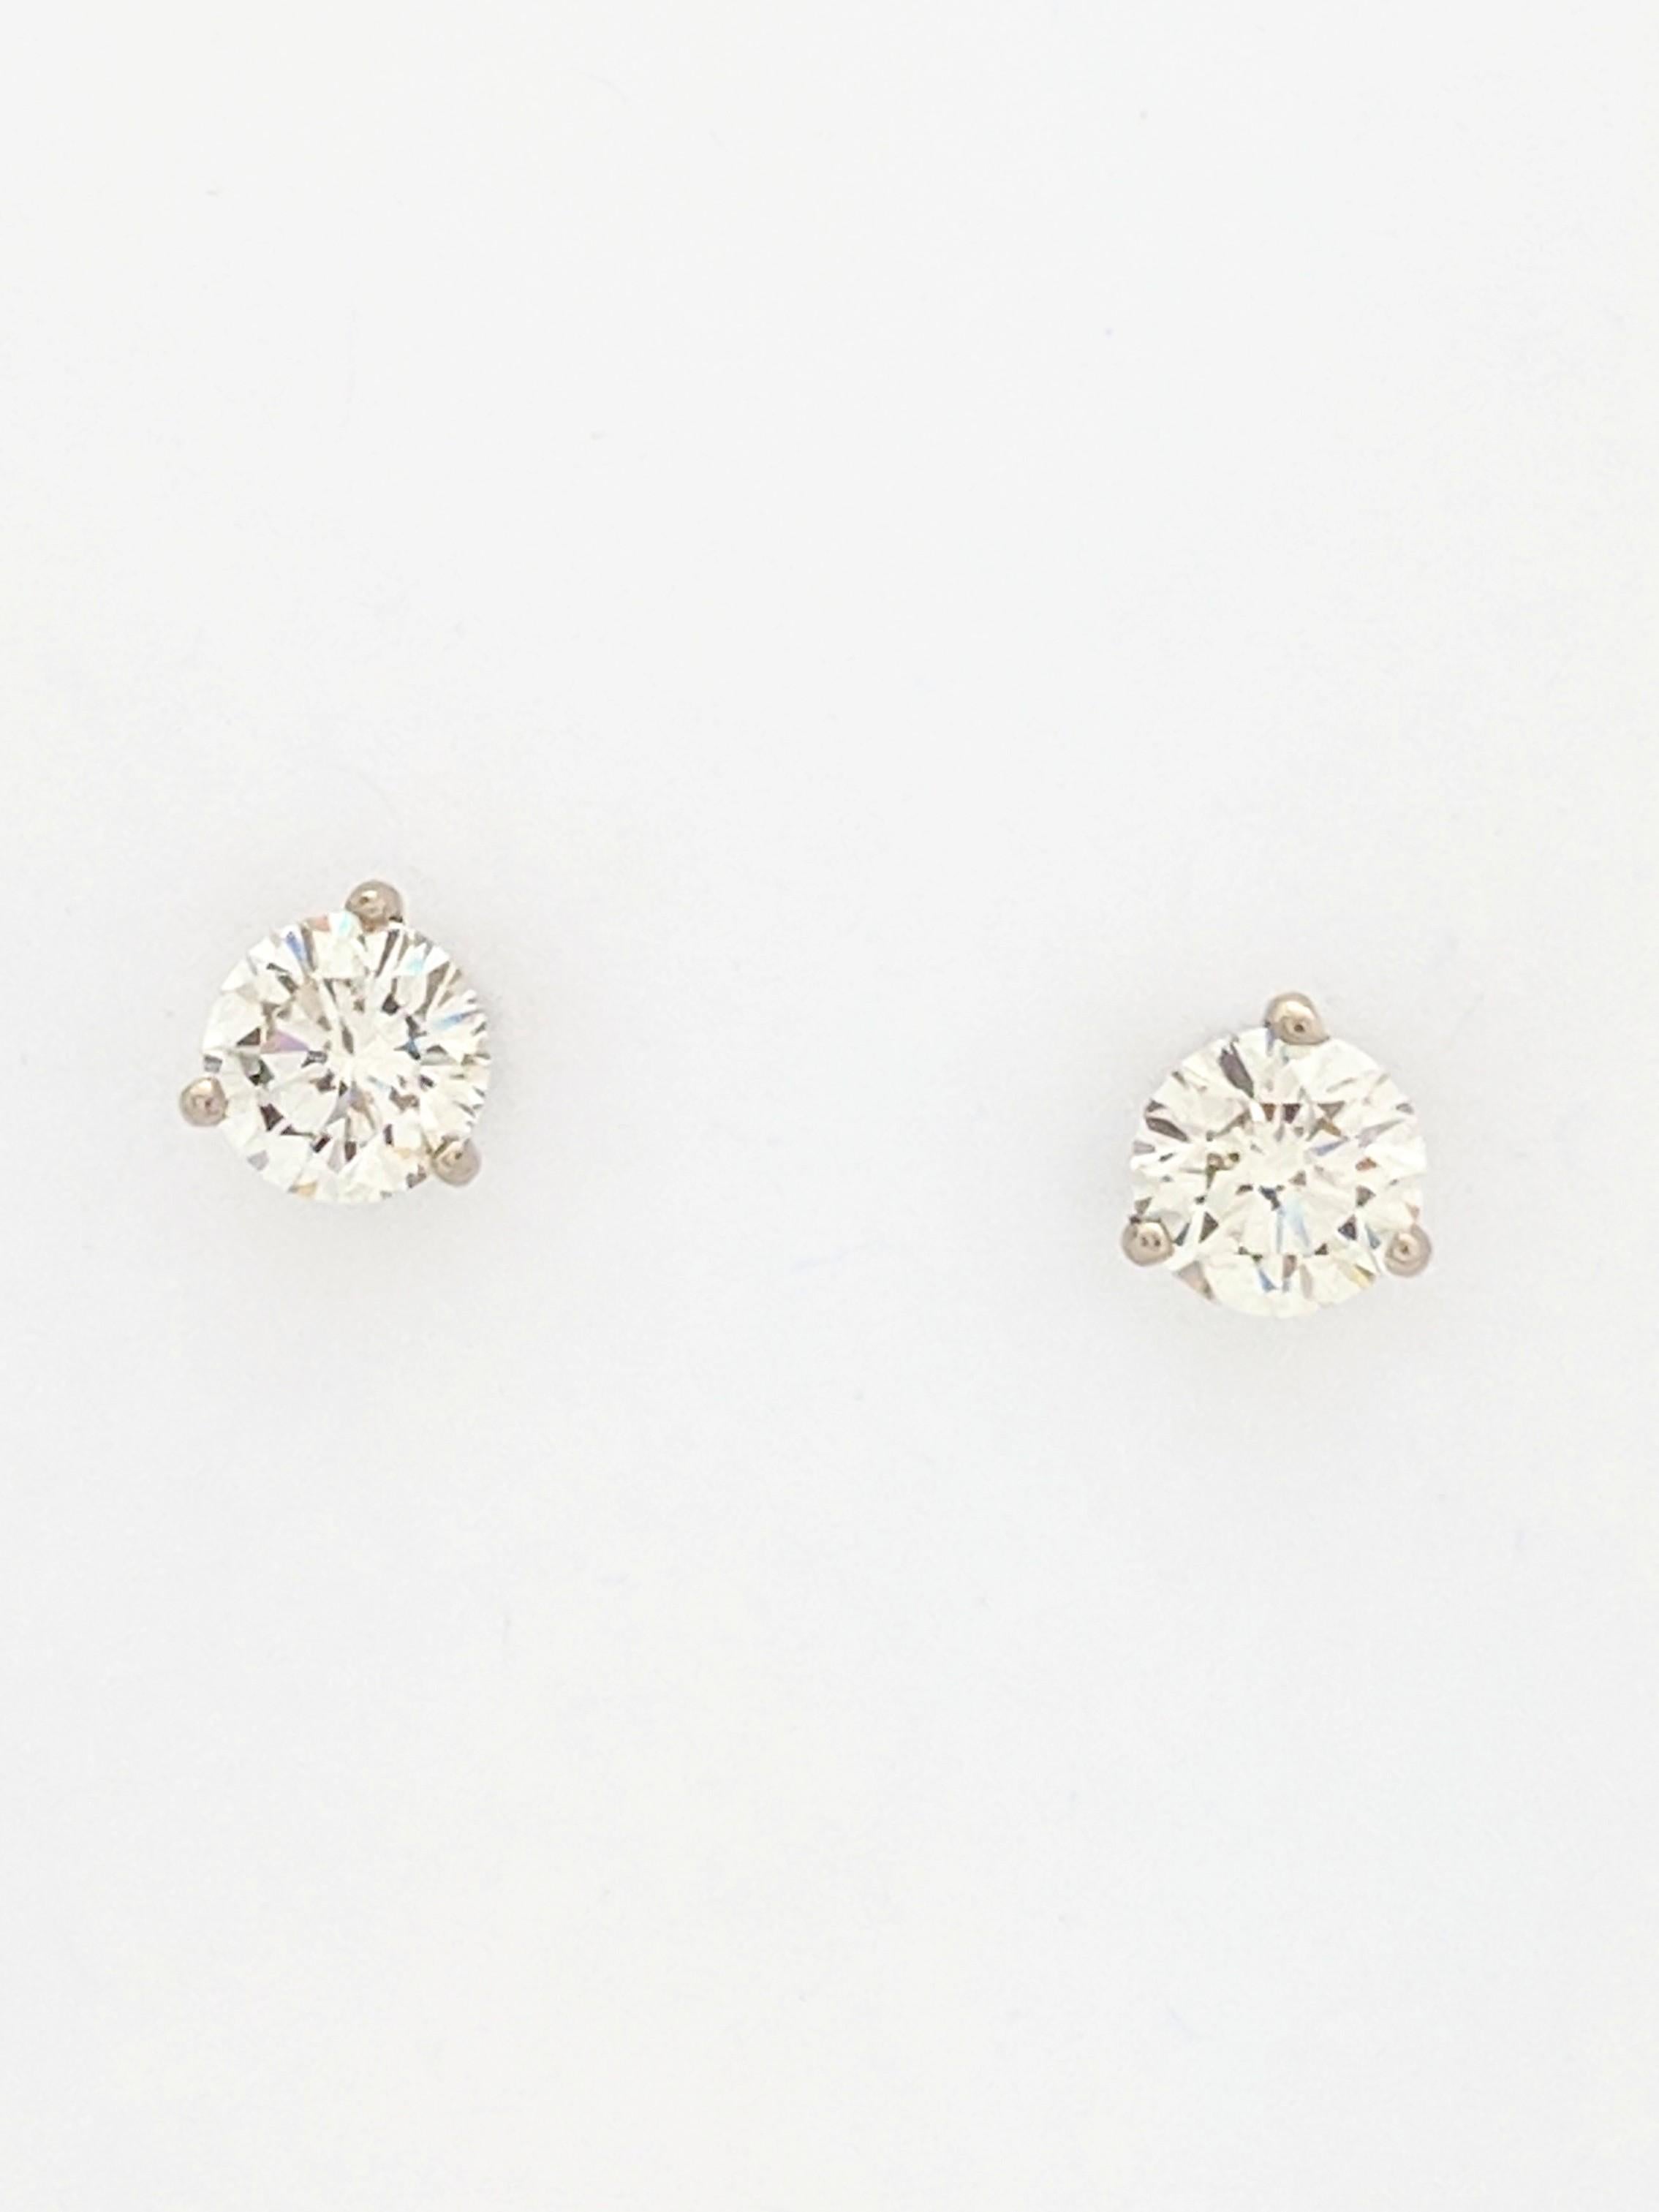 You are viewing a Beautiful Pair of Diamond Stud Earrings. These earrings are crafted from 14k white gold and weighs 1.1 grams. Each earring features approximately (1) 0.815ct natural round brilliant cut diamond which measures 6mm for an estimated